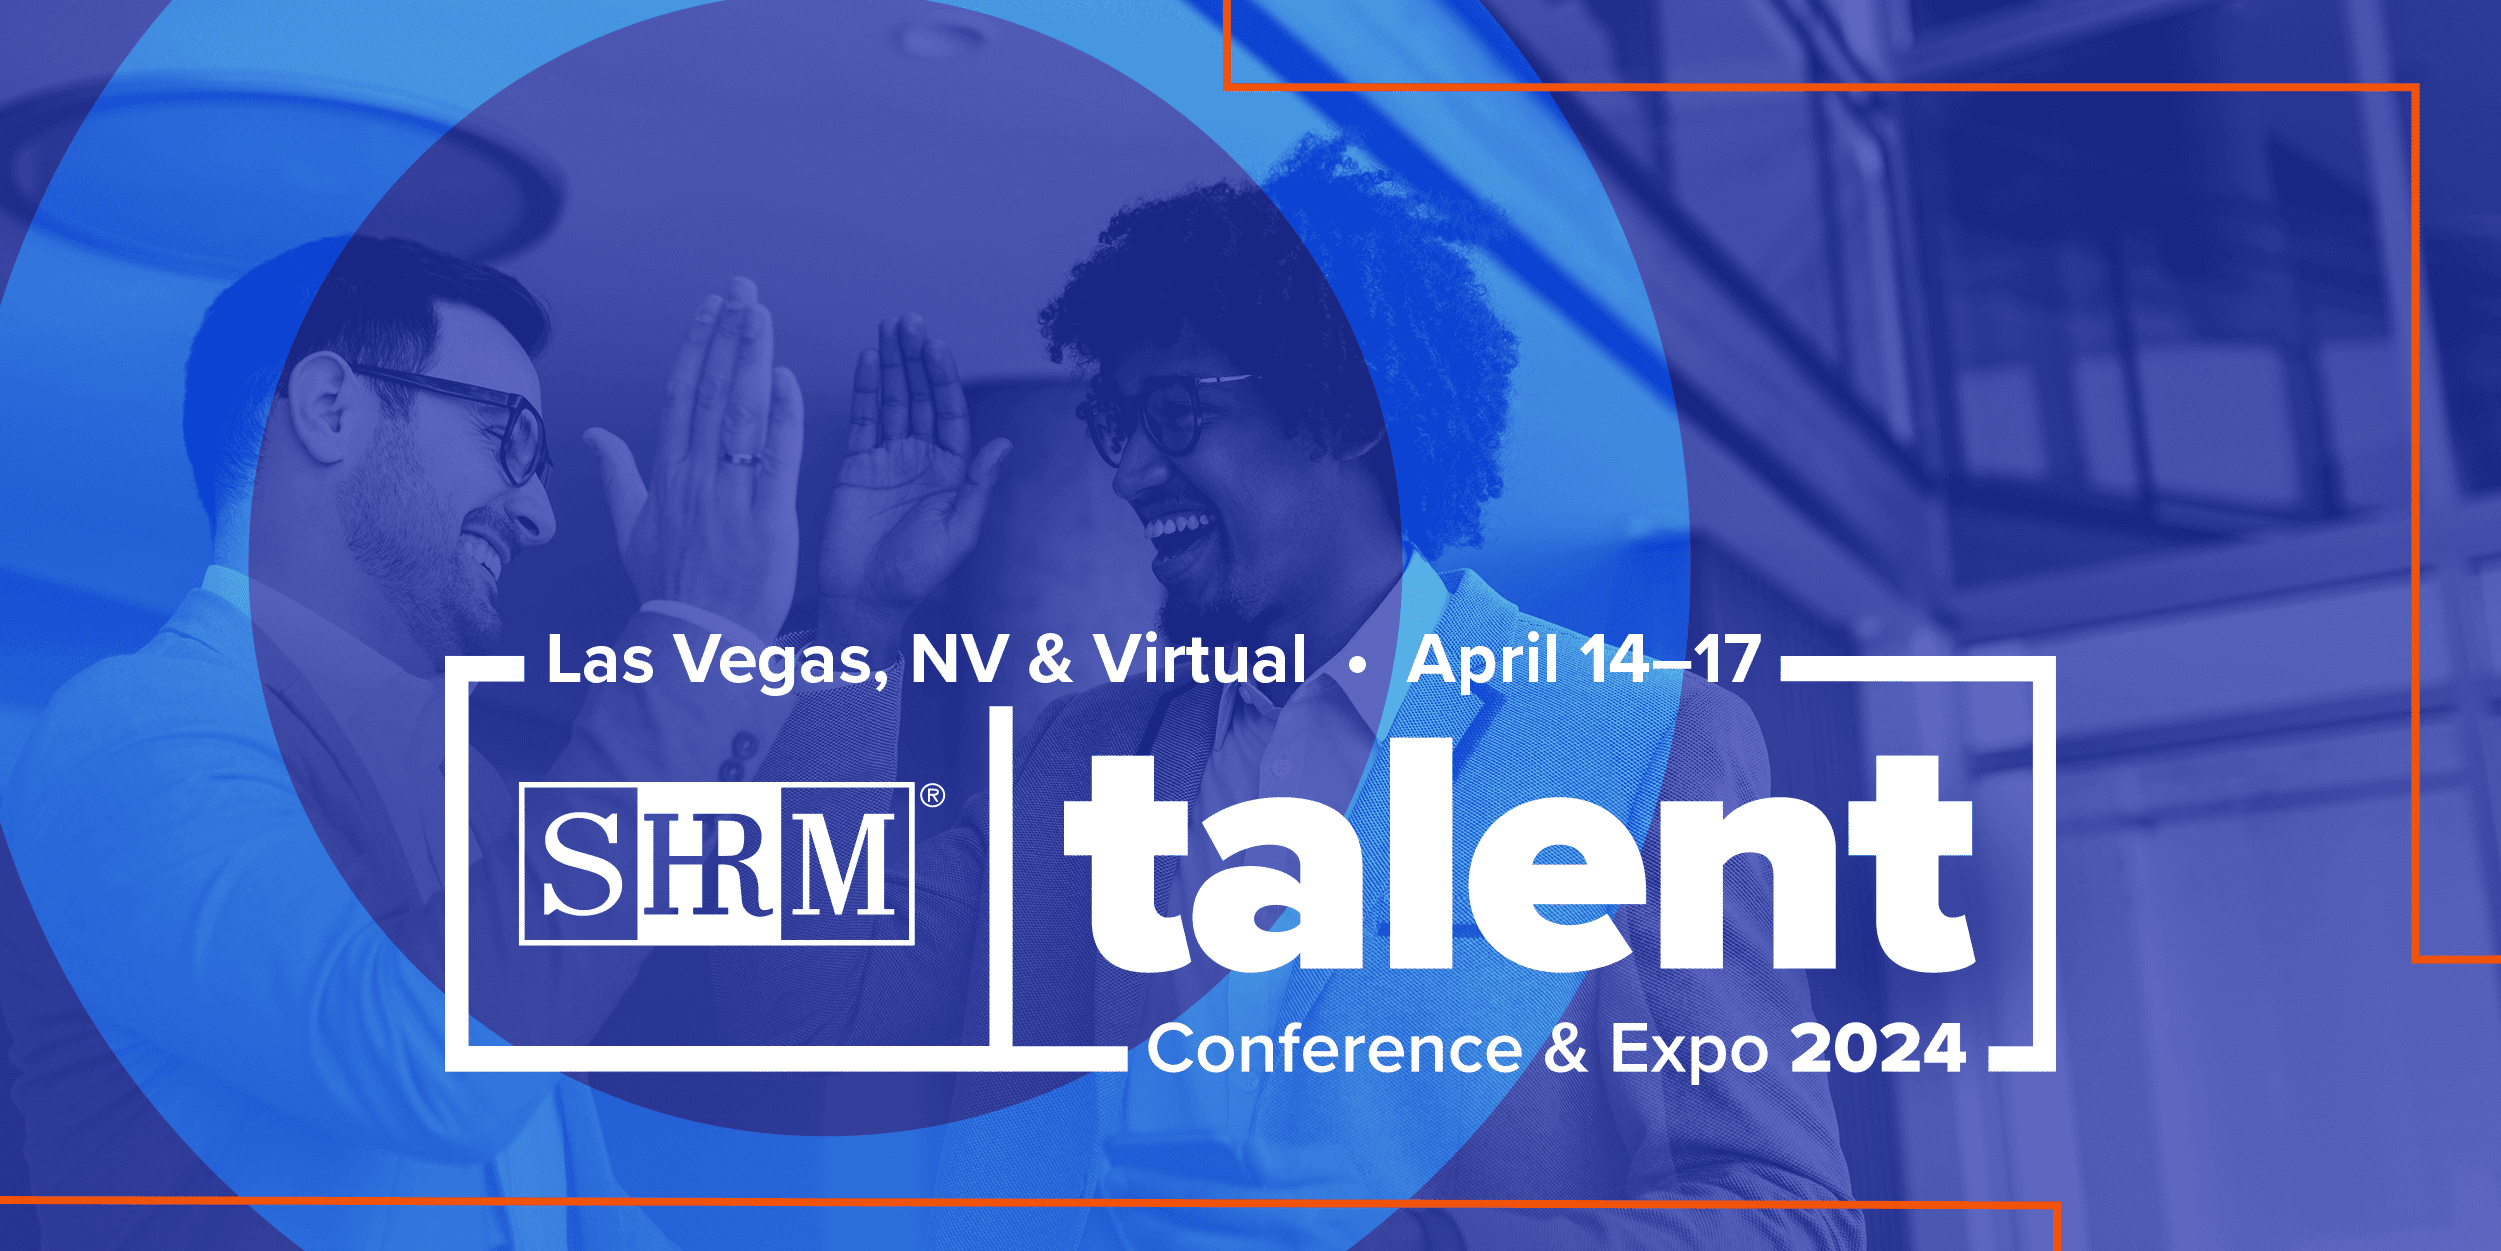 SHRM Talent Conference & Expo Logo